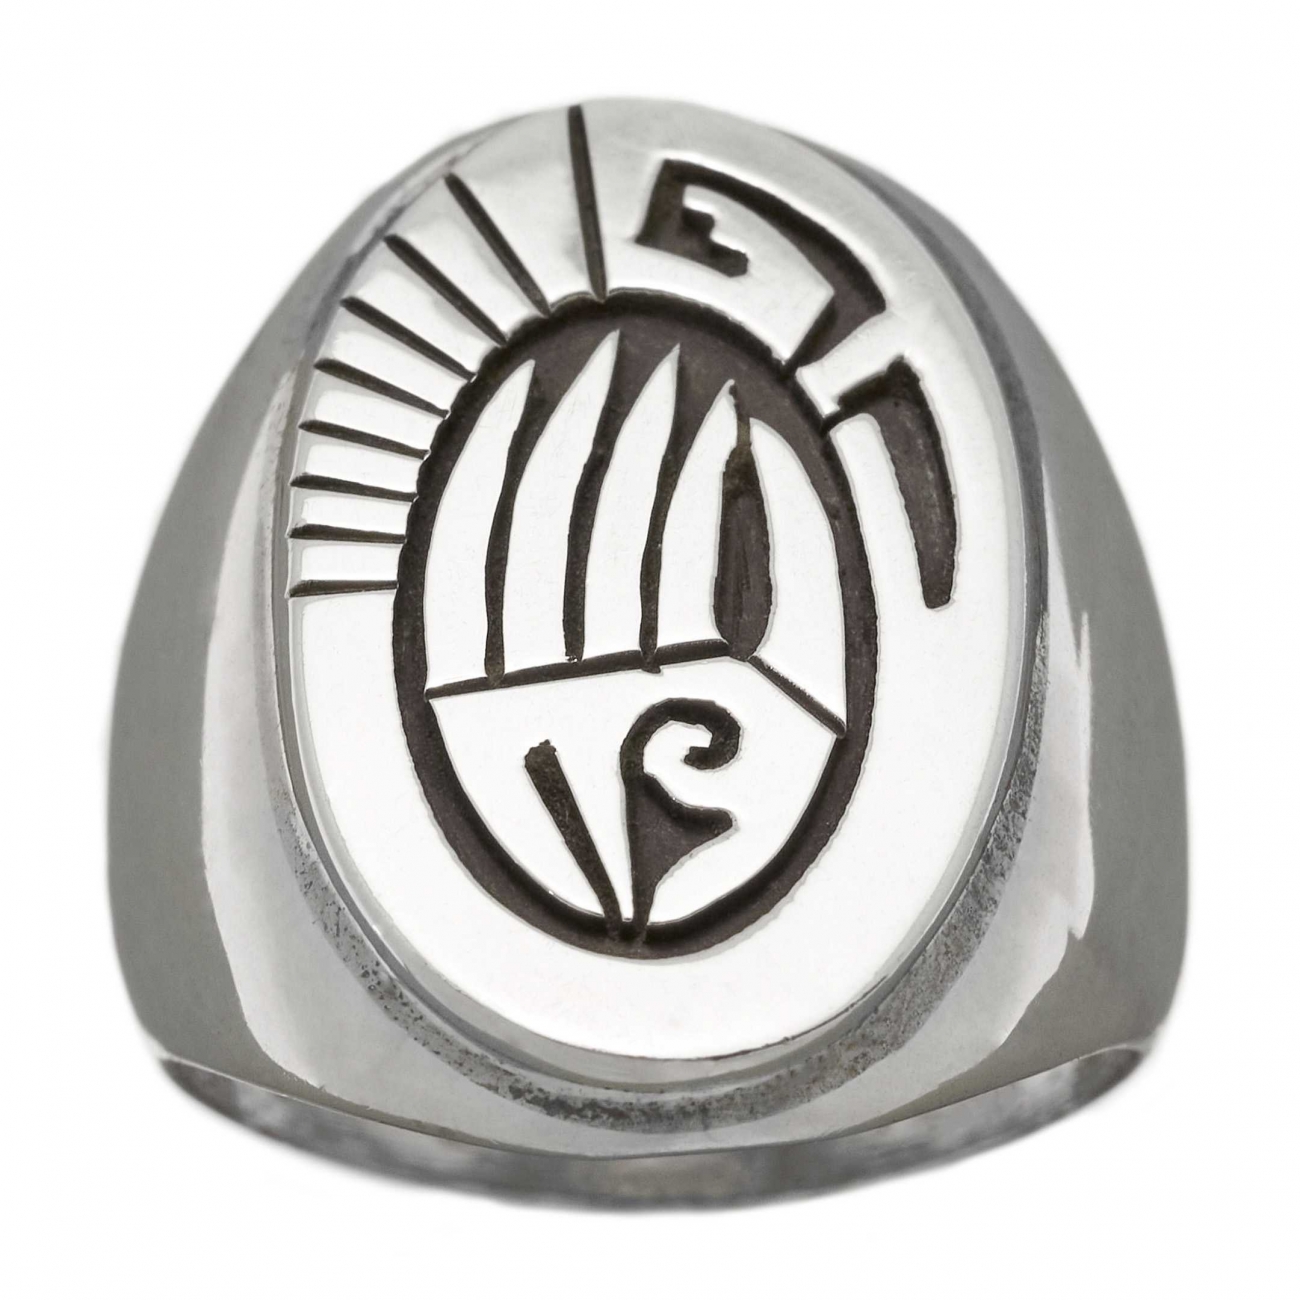 Hopi ring in silver with a bear paw, BA896 - Harpo Paris